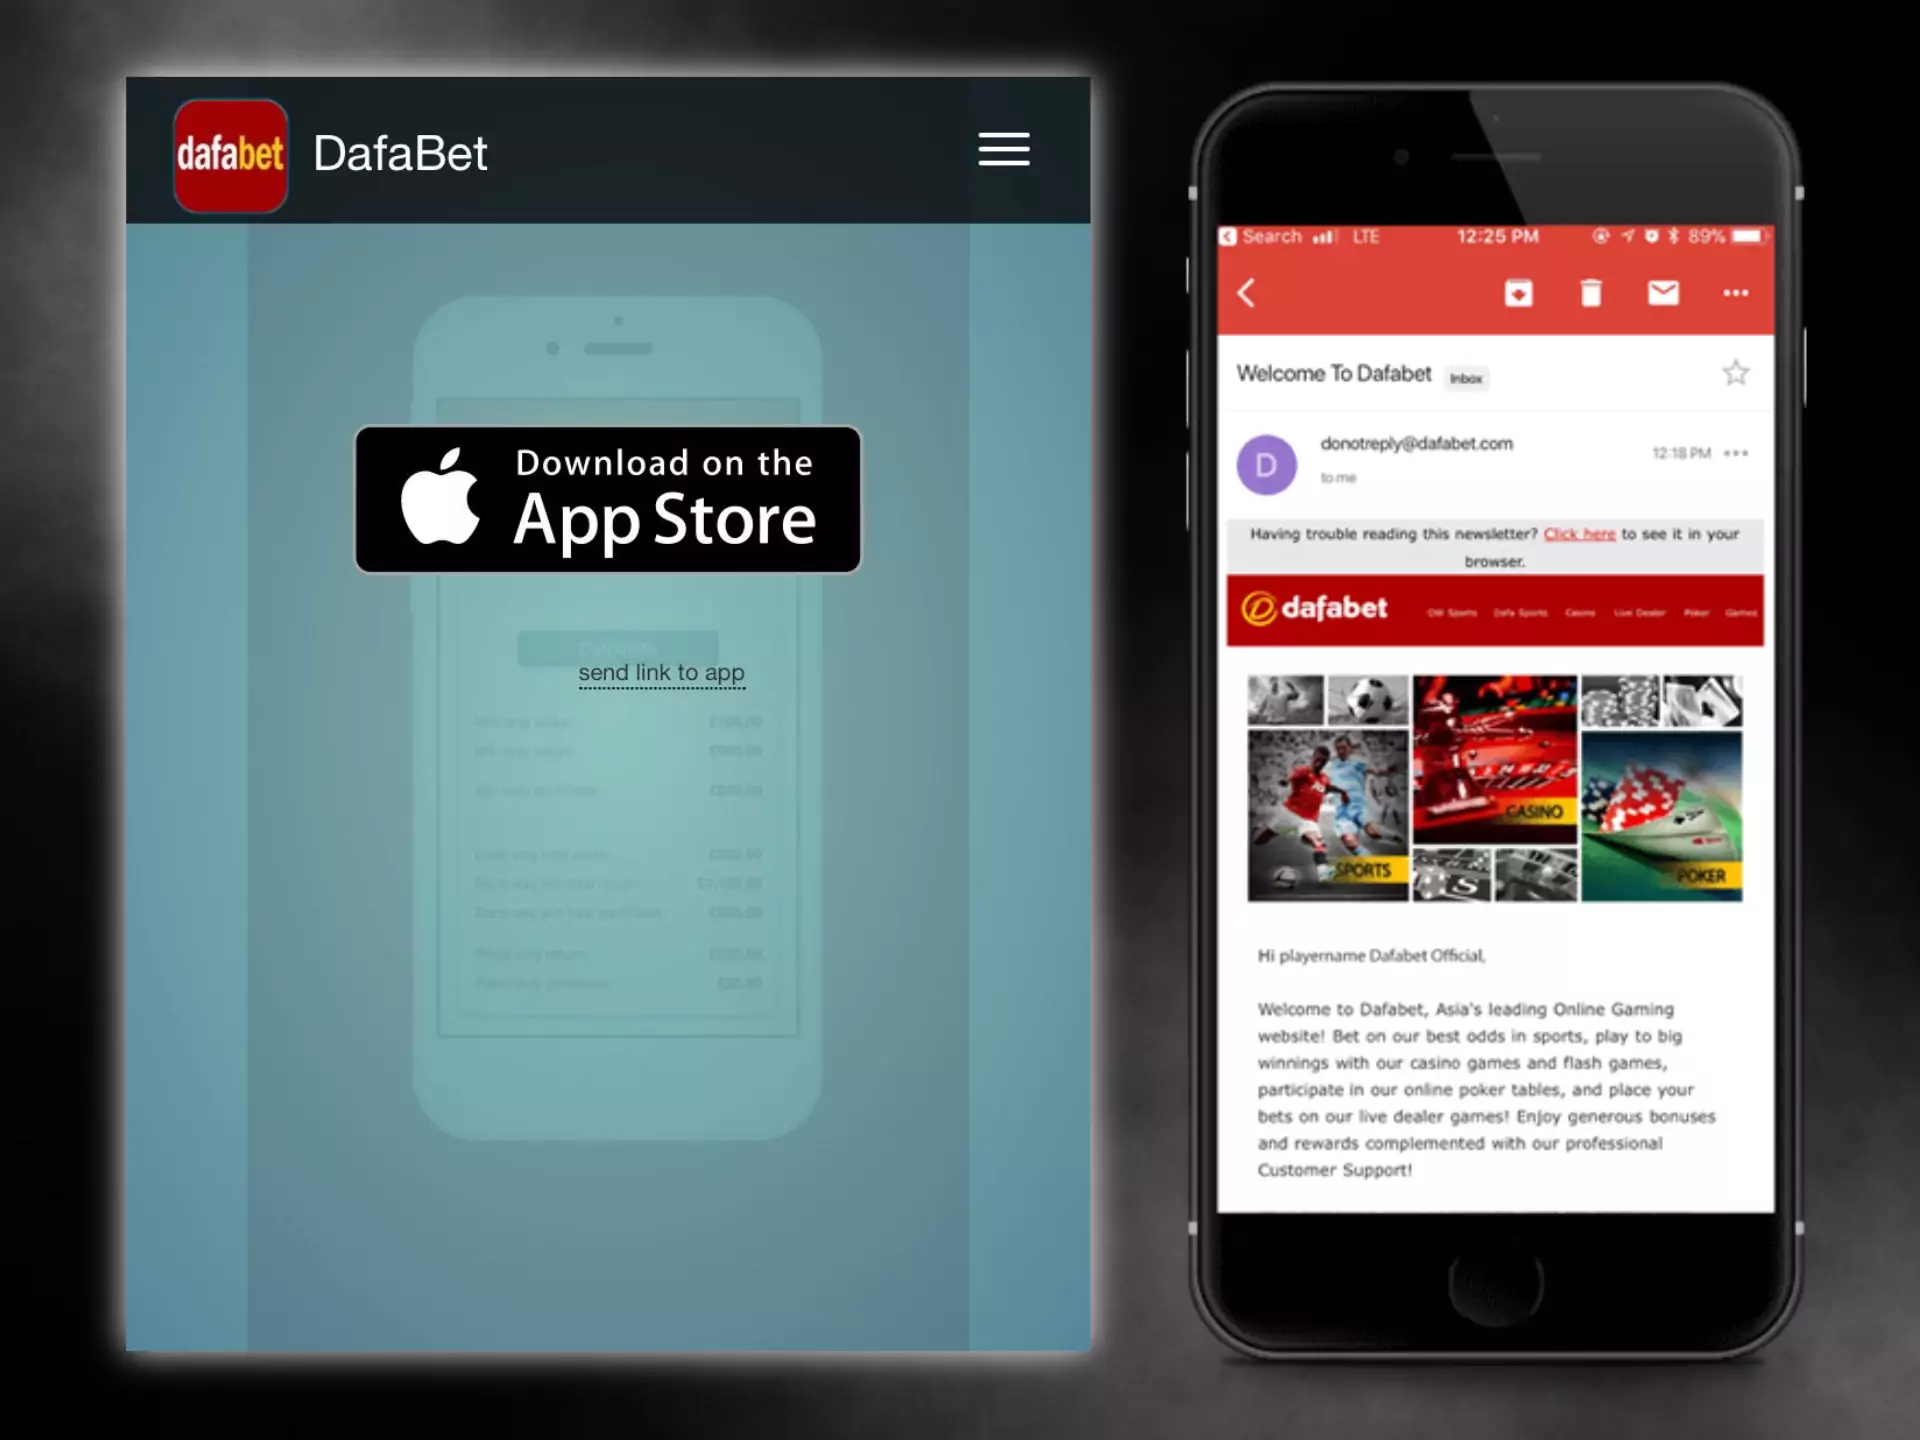 Your iPhone should meet the necessary requirements to download and install the Dafabet app.